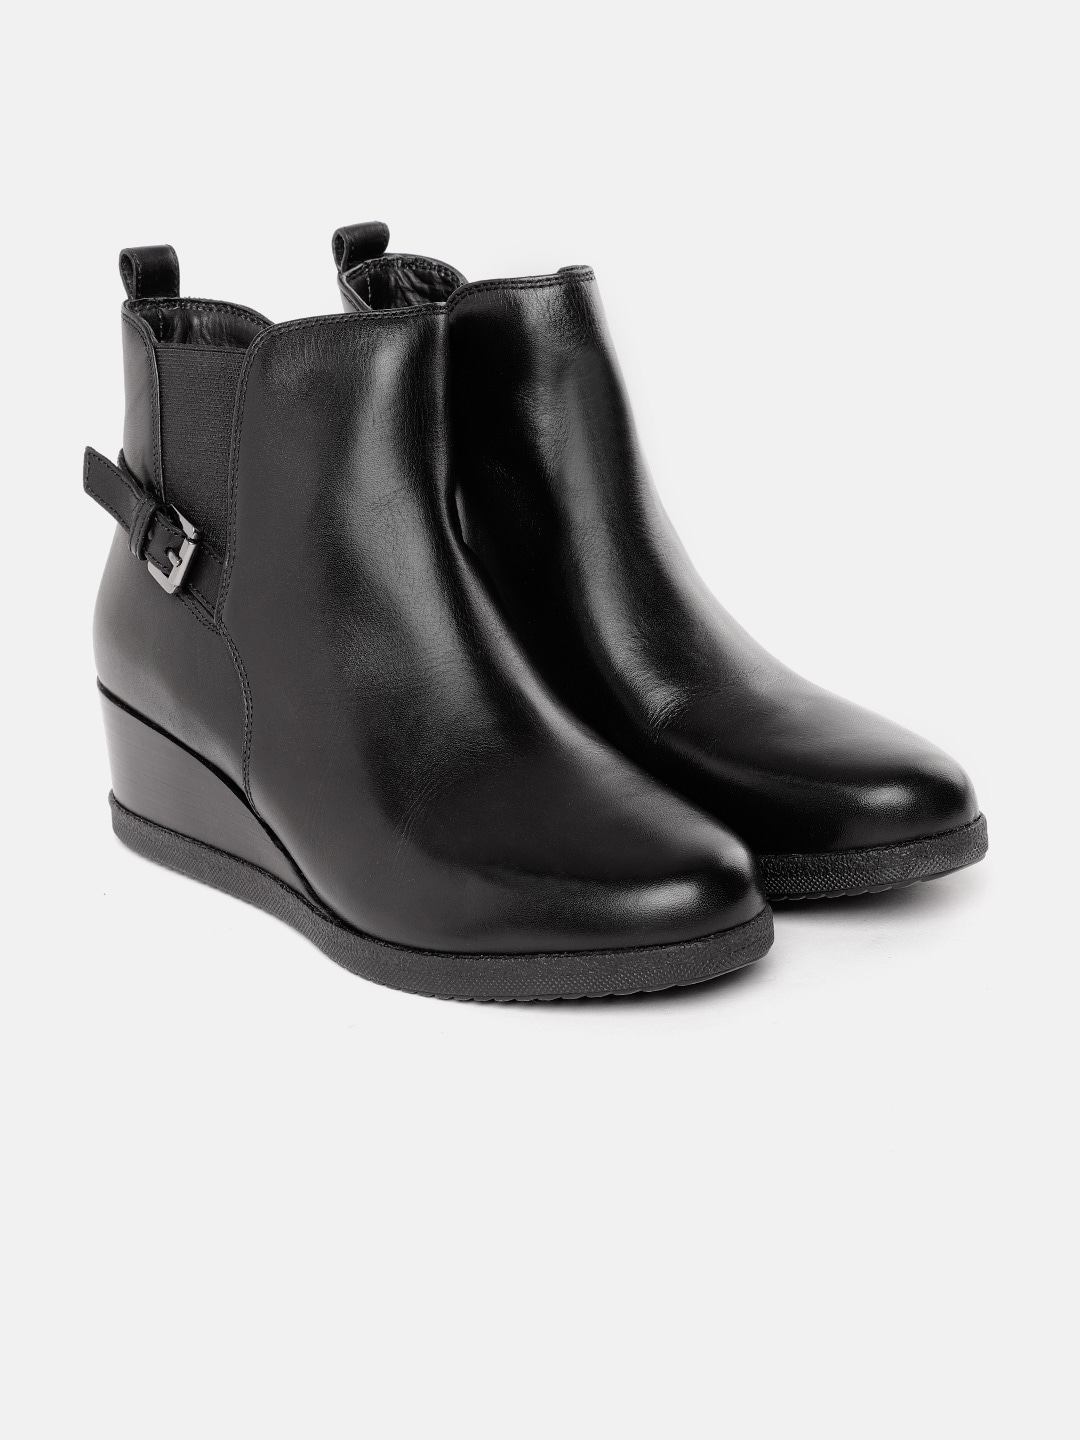 Geox Women Black Leather Heeled Boots Price in India